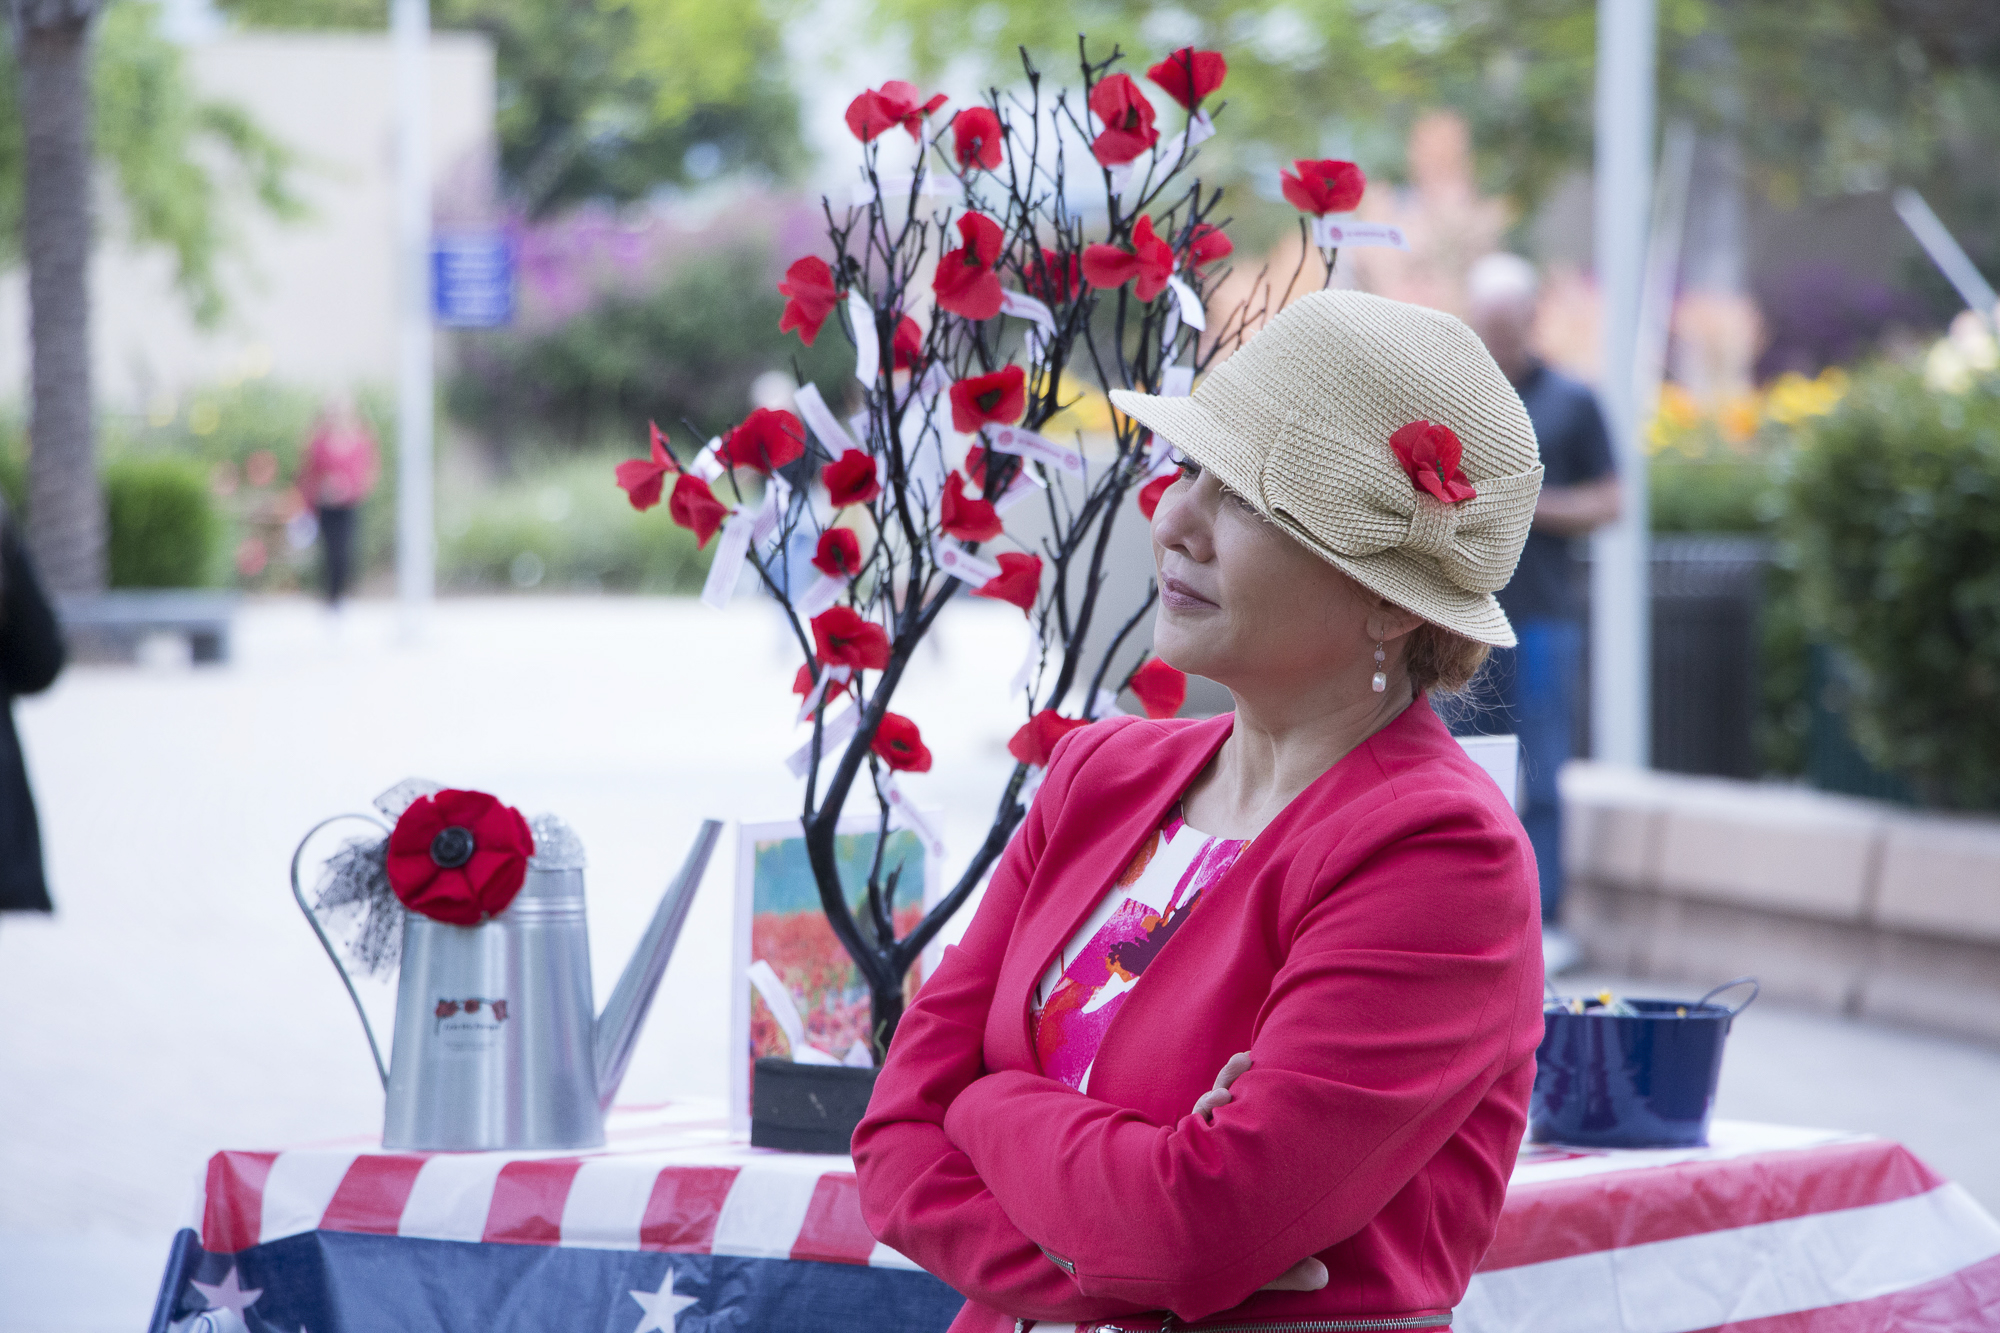  Cynthia Gonzales, a professor at Santa Monica College and a member of the American Legion Auxillary, stood off to the side, in front of a display with red poppys during a speech at the Memorial Day Commemoration on Thursday, May 25 in Santa Monica, 